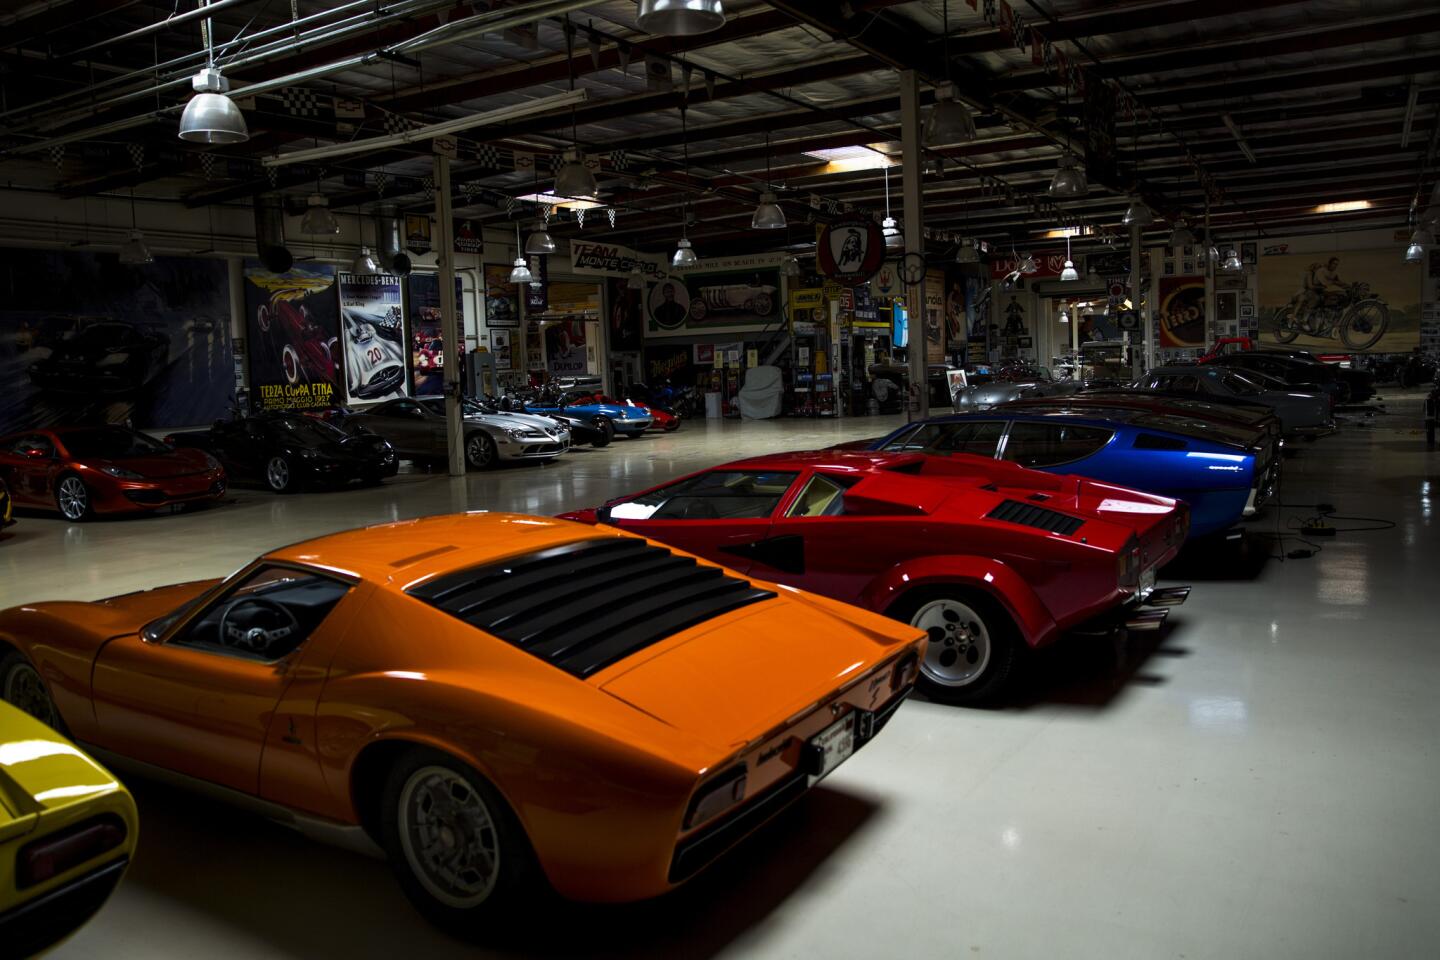 A visit to Jay Leno's garage